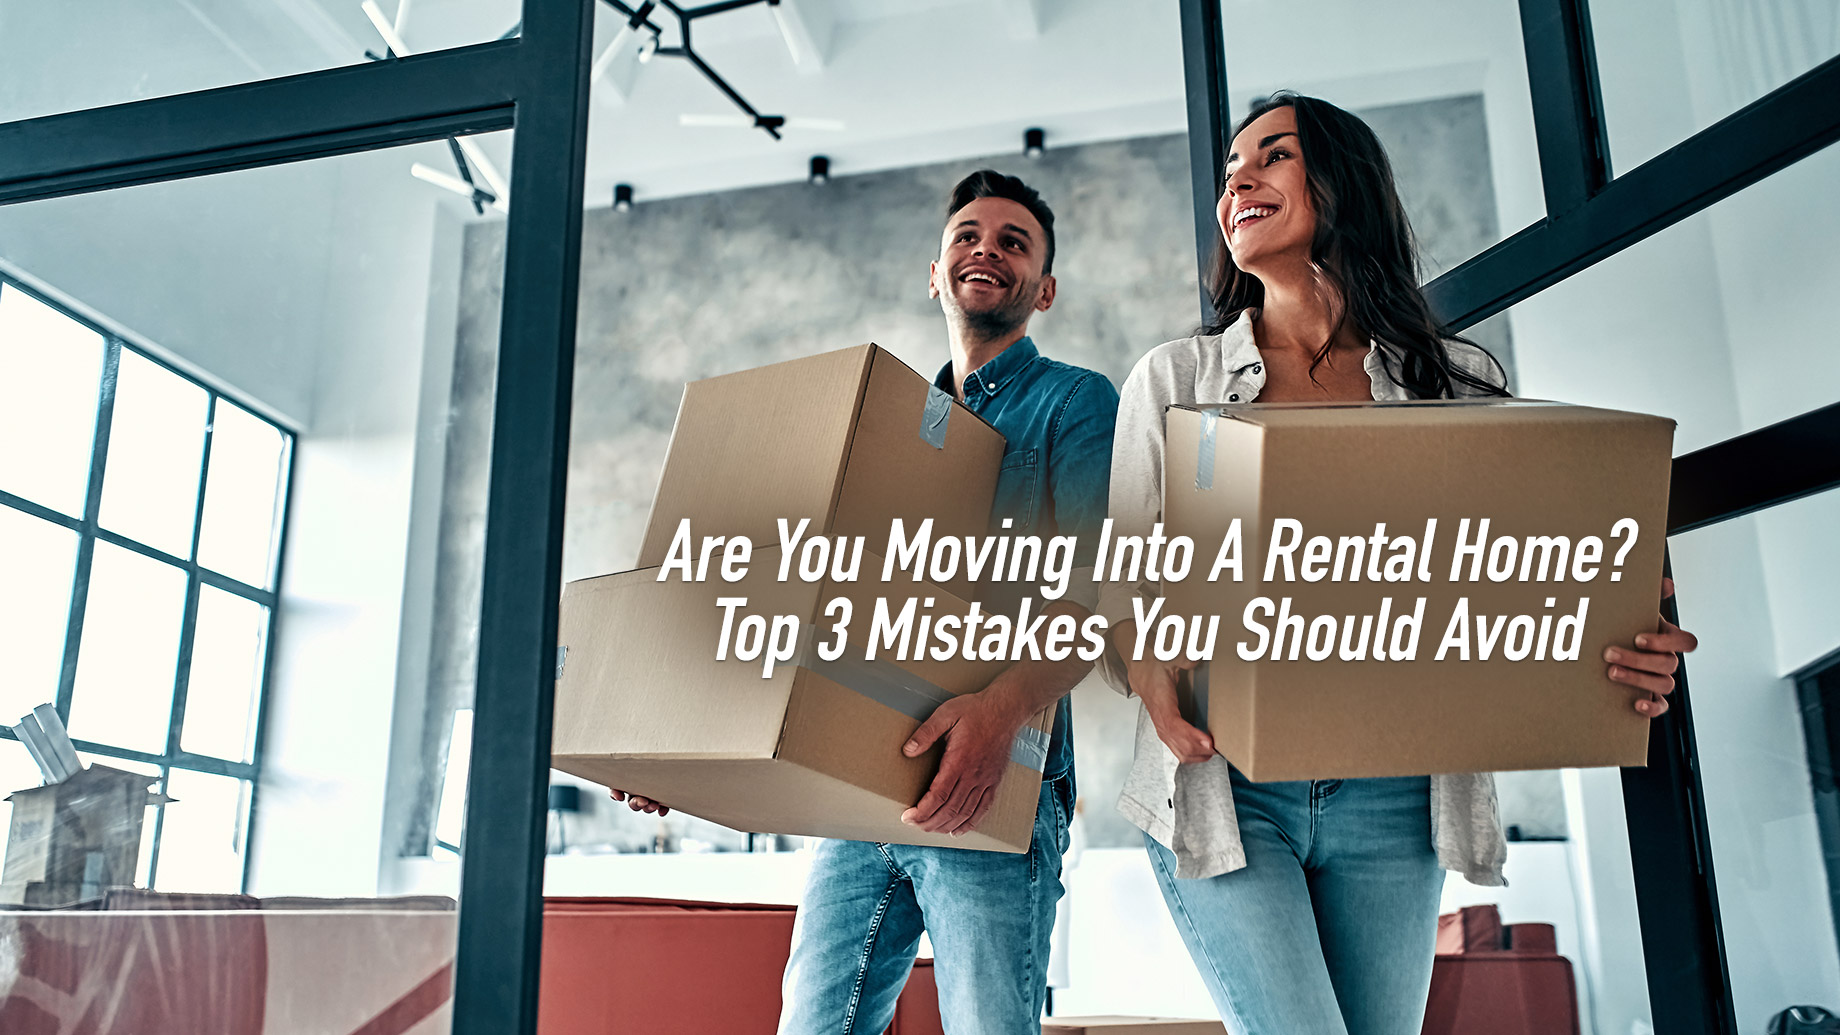 Are You Moving Into A Rental Home? Top 3 Mistakes You Should Avoid